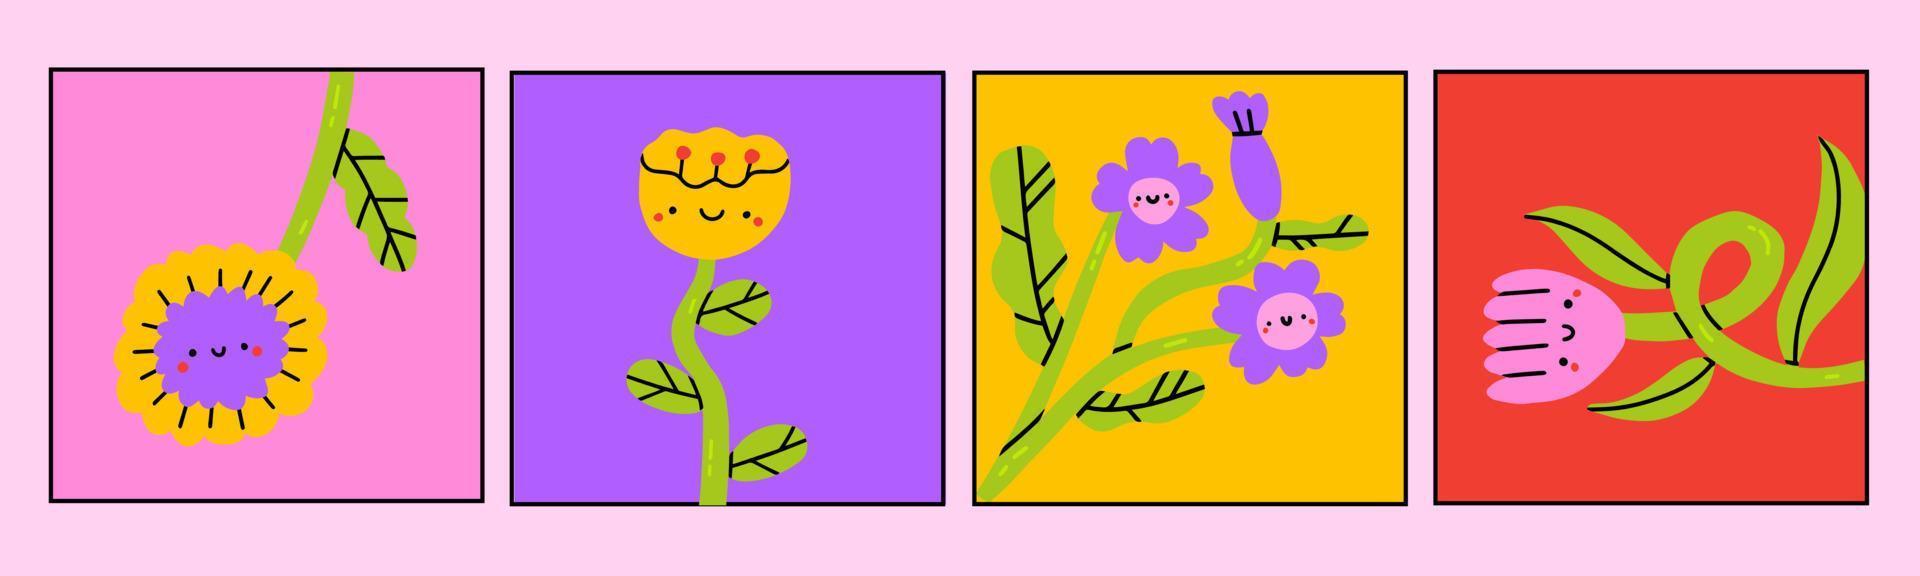 Abstract simple Plants and Flowers with eyes. Hand drawn colored Vector Set. Floral design, Naive art, Infantile Style Art. Colorful trendy illustration. Pre-made cards or prints